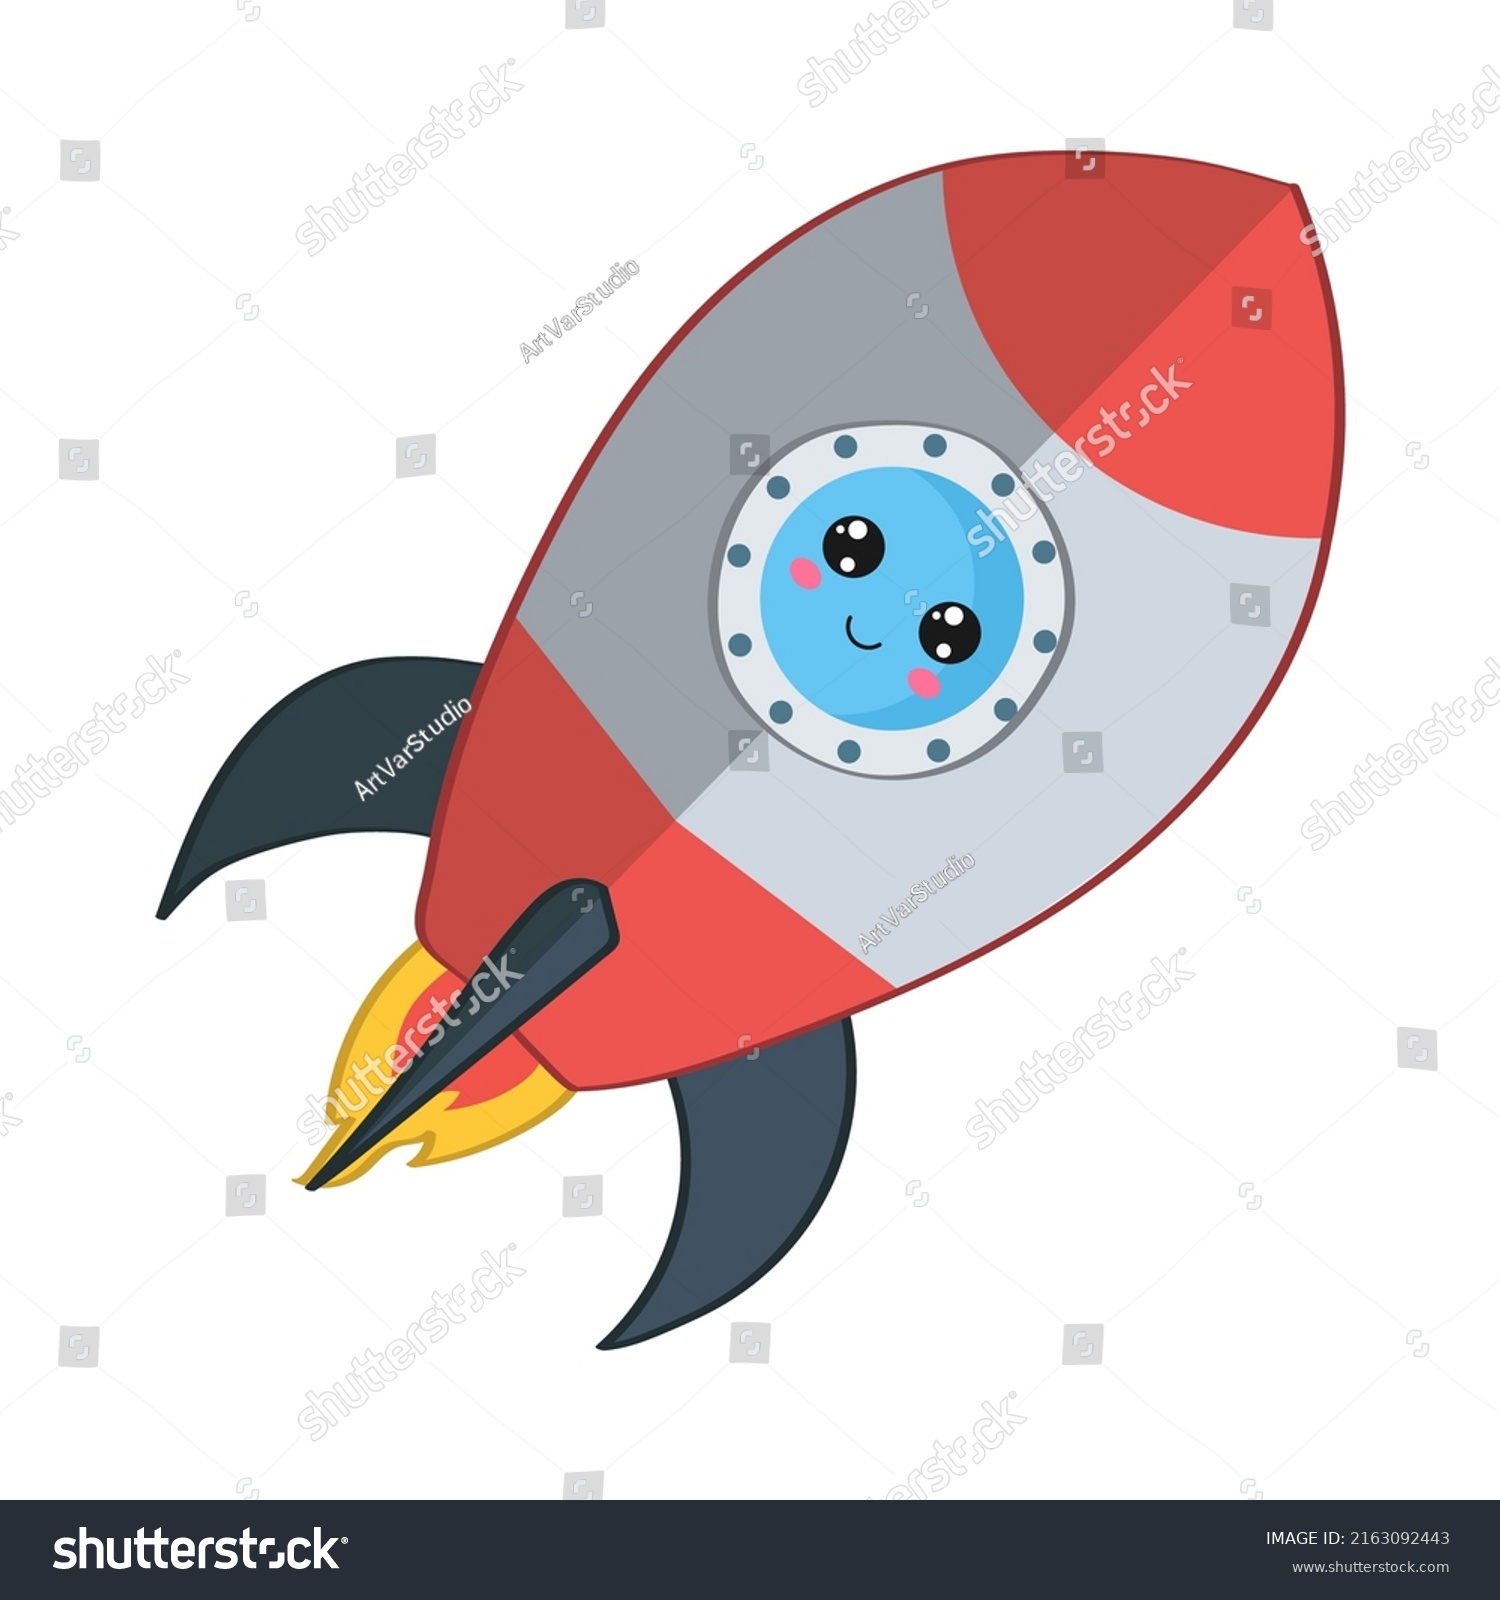 SVG of Cute kawaii rocket Vector illustration of a rocket. Illustration of rocket for kids, baby book, fairy tales, covers, baby shower invitation, textile t-shirt.
 svg